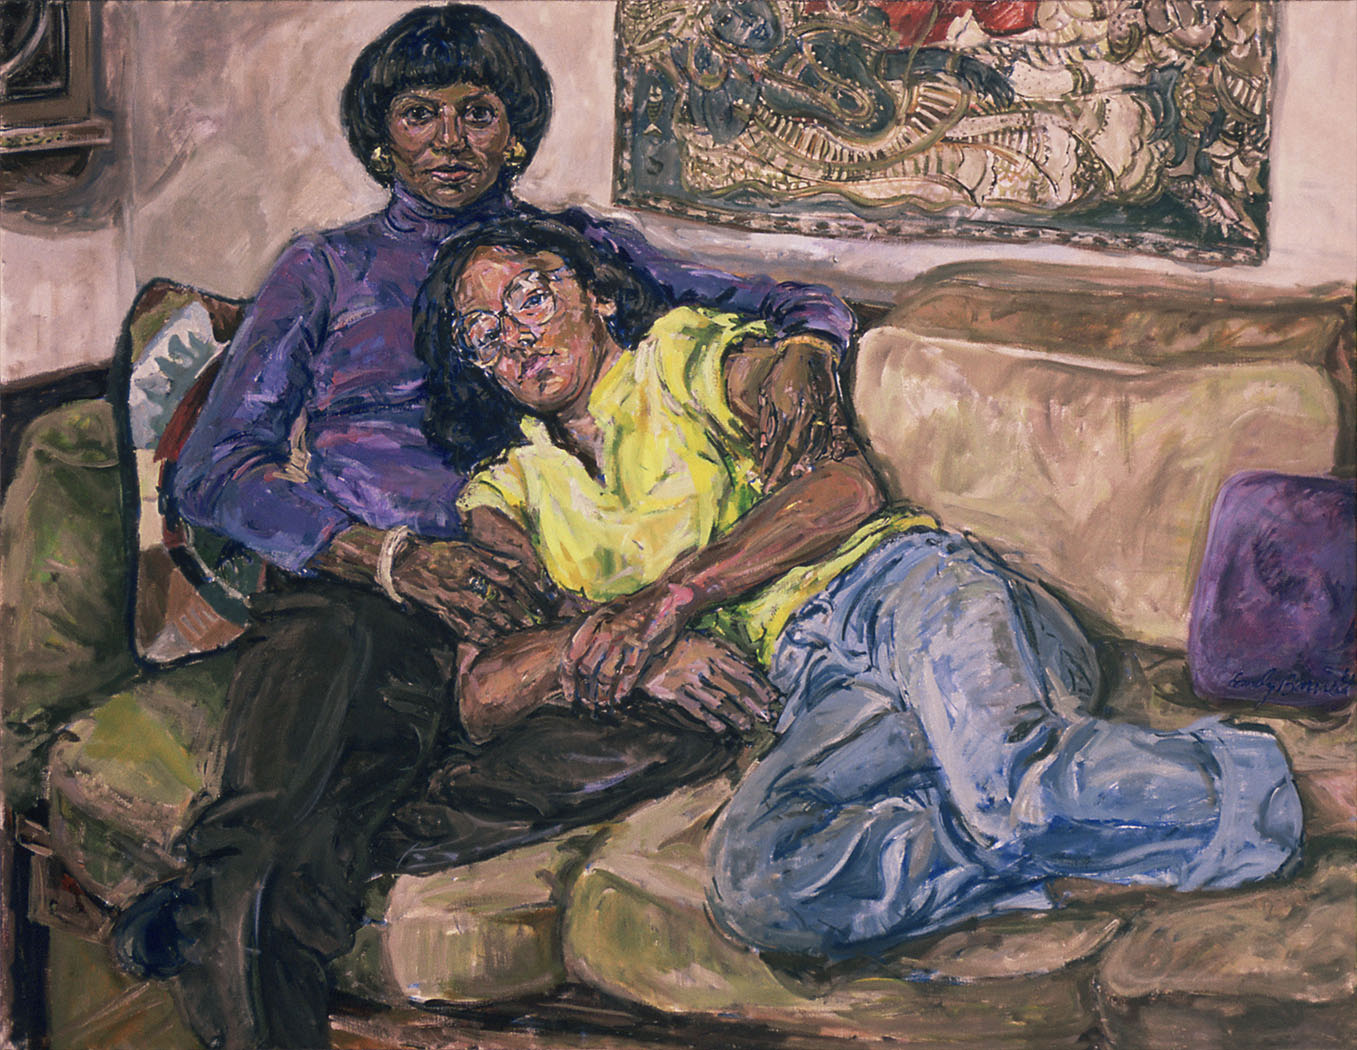  Margie and Amy, 1982,  Oil on Canvas, 52 x 56 